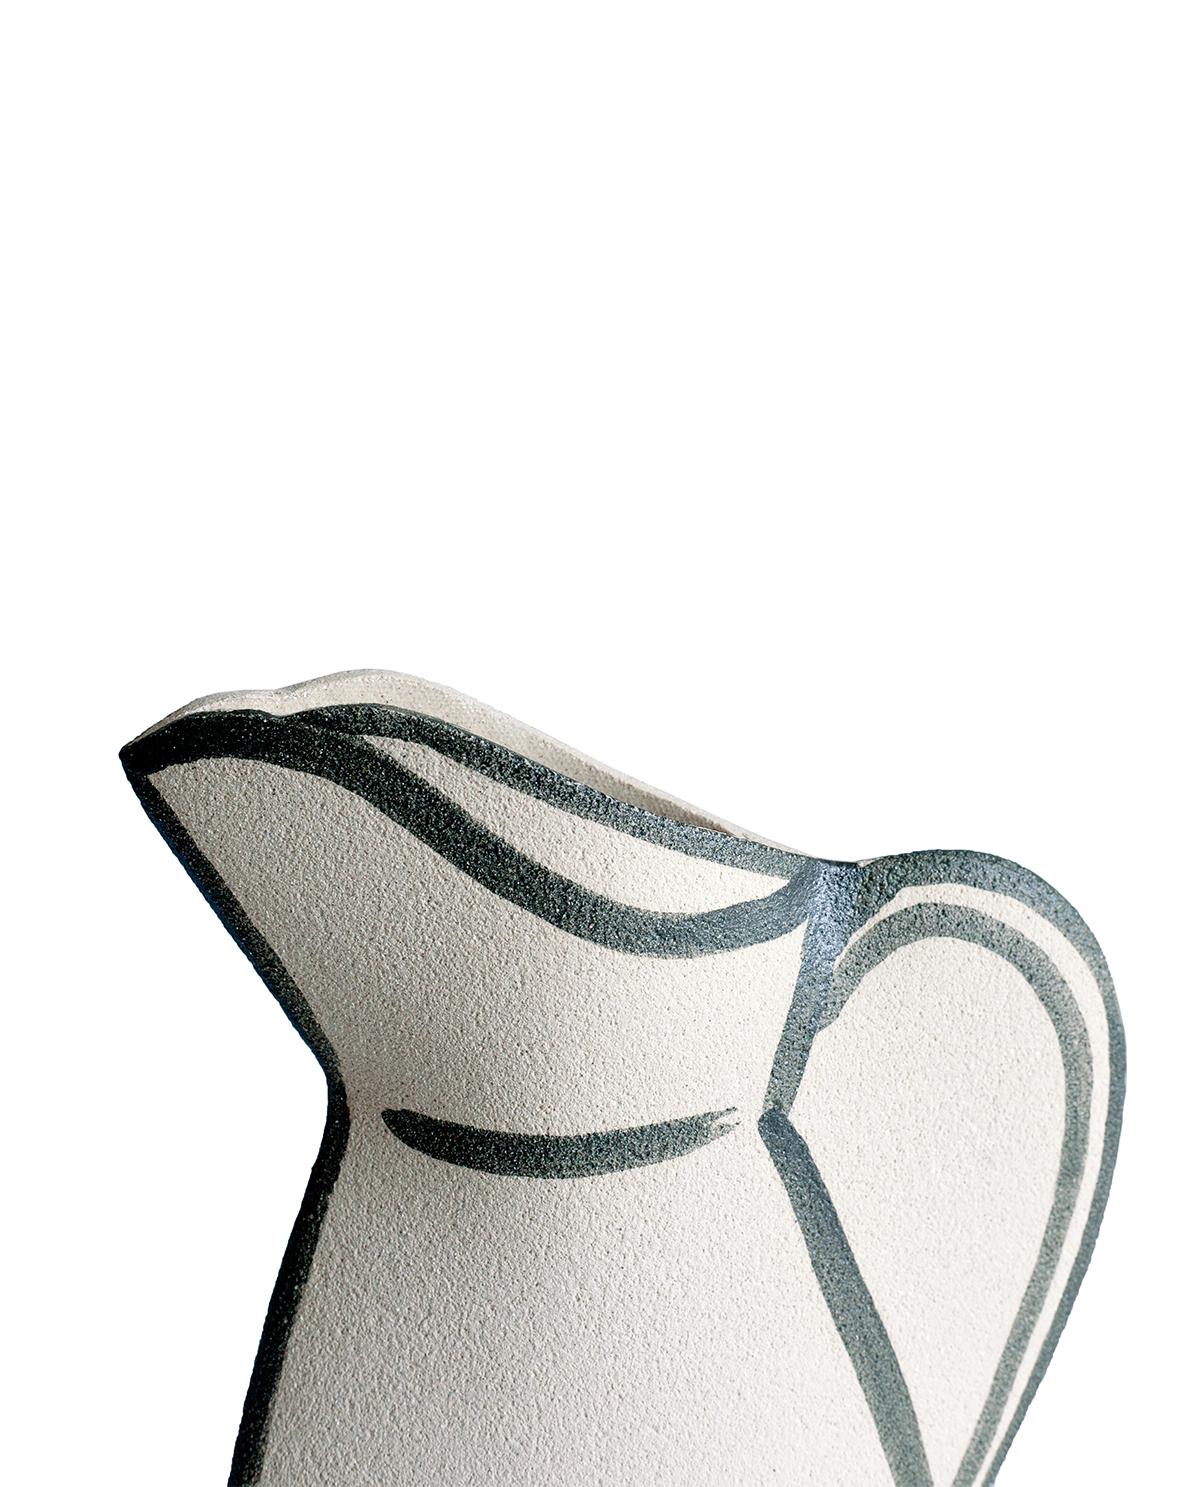 European 21st Century ‘Morandi Pitcher - Black’, in White Ceramic, Hand-Crafted in France For Sale